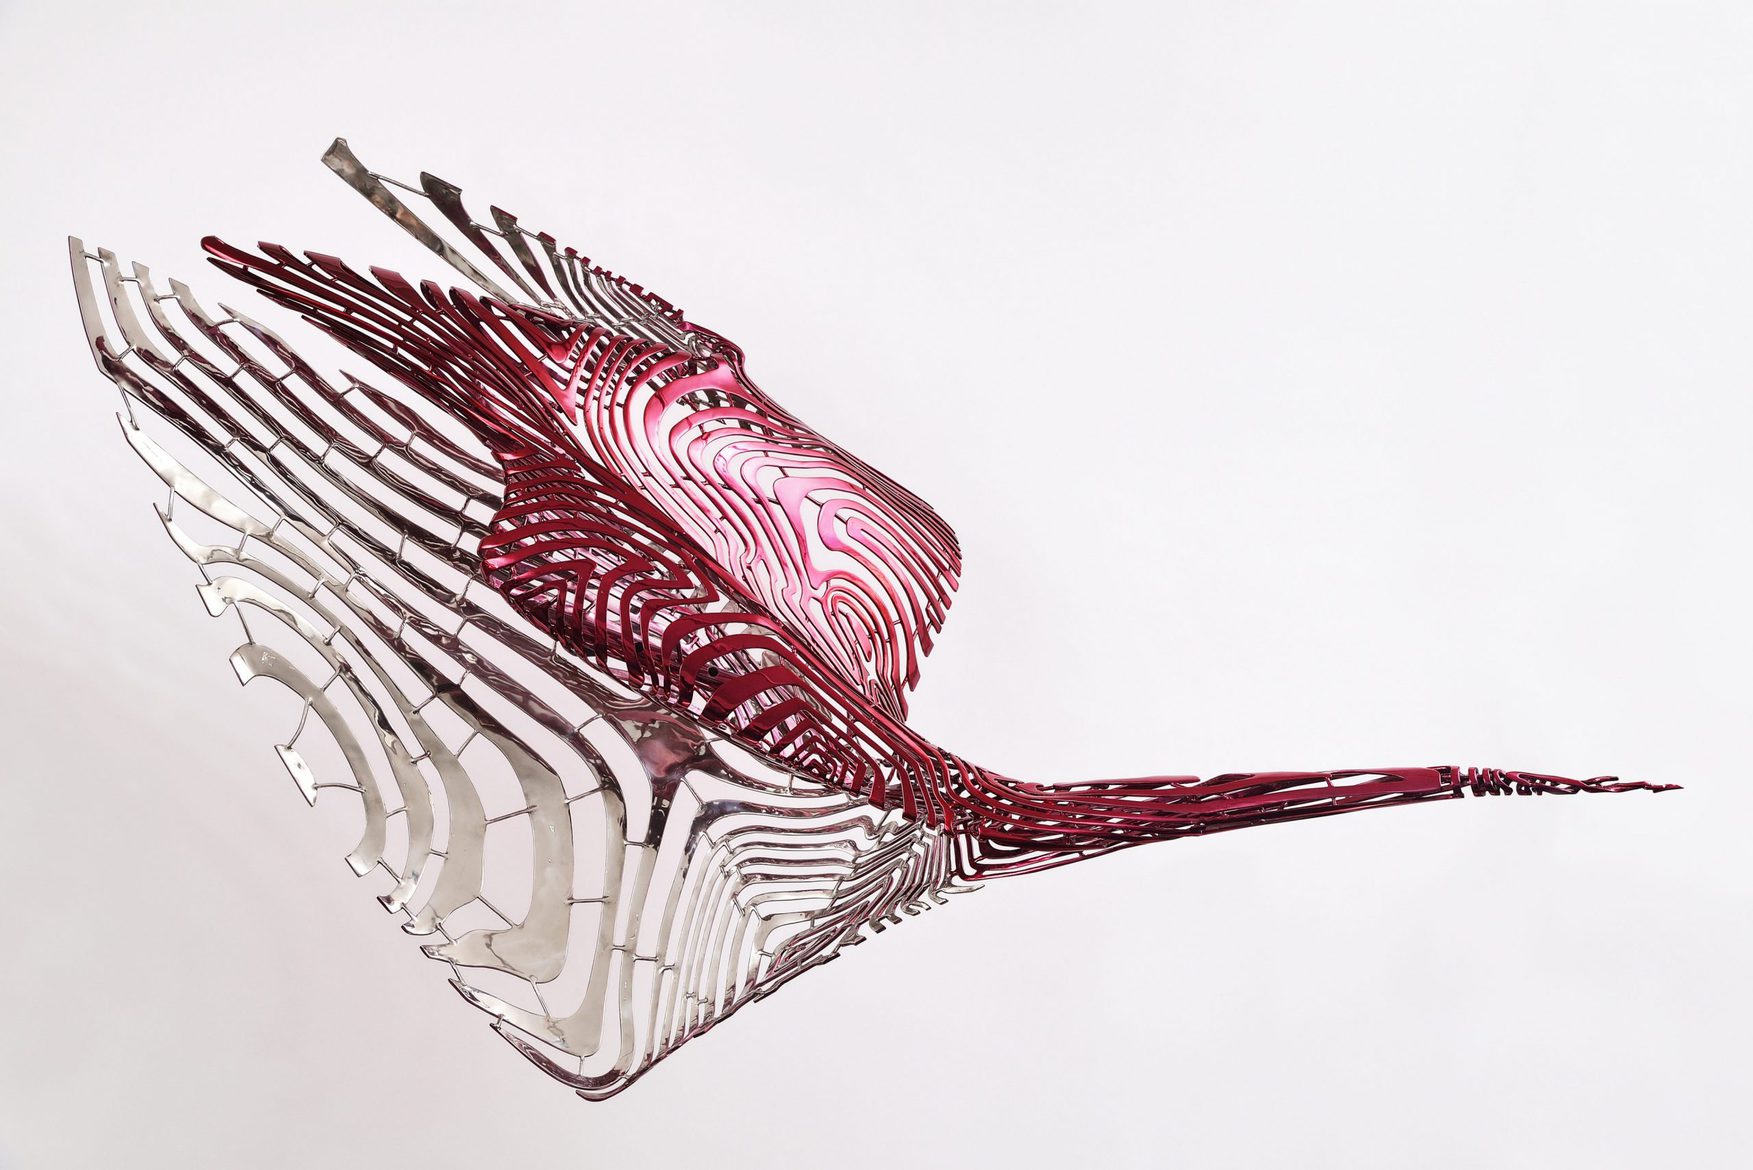 ‘Come to the Edge 2’, 2012, stainless steel, red fluoropolymer, 96 x 161 x 49 cm, edition 1 of 5 + 1AP